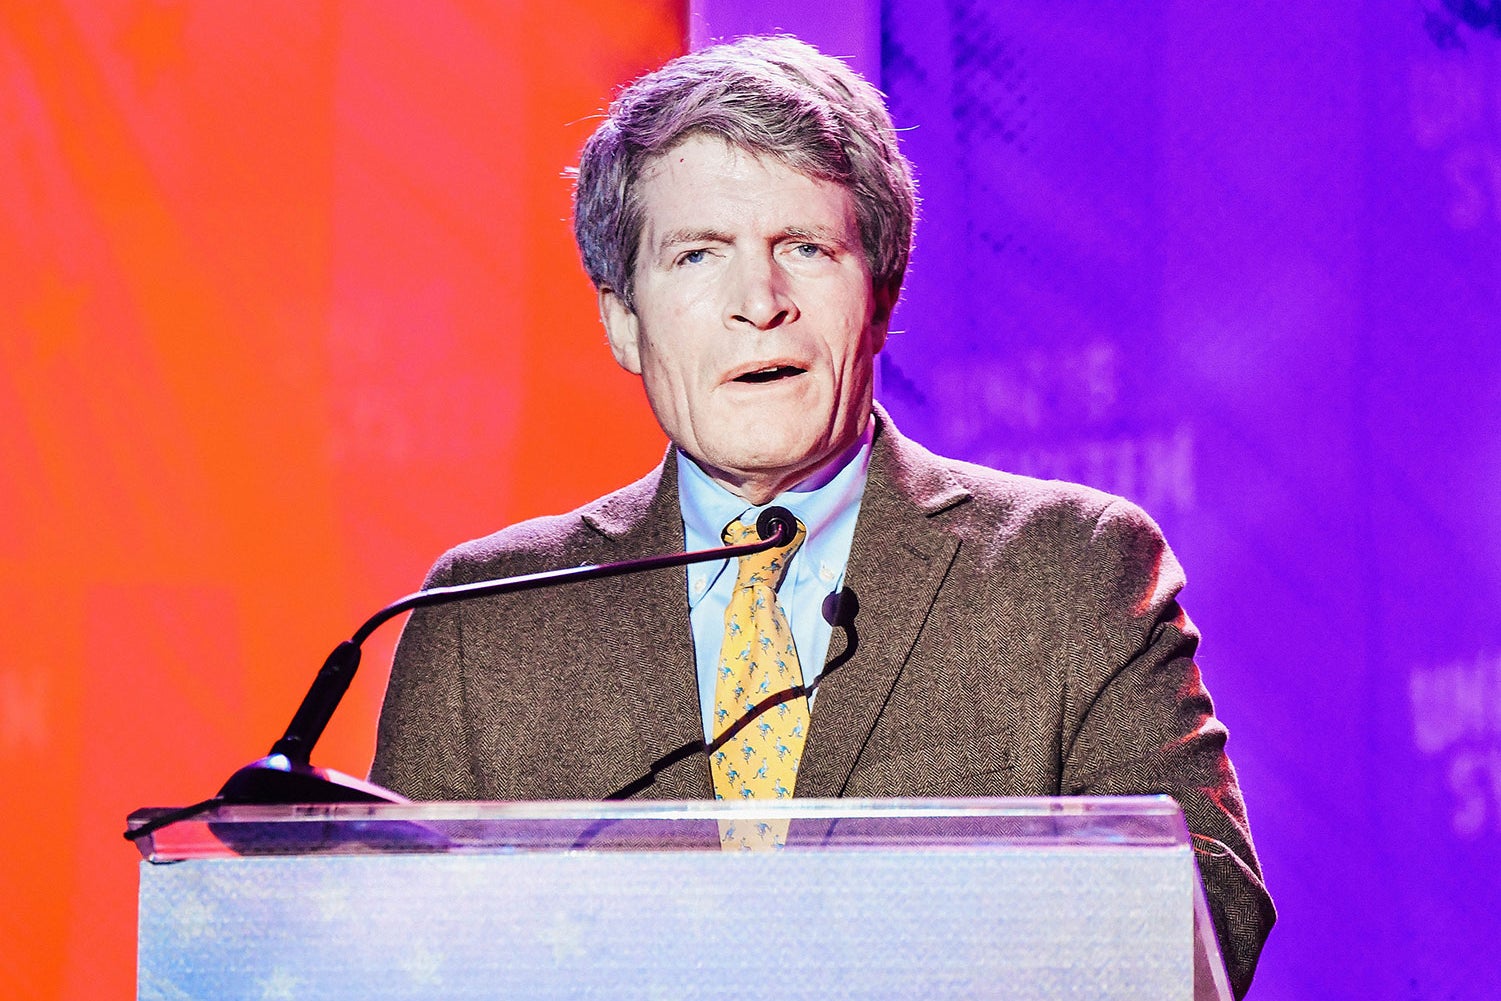 Professor Richard Painter speaks during Unrigged Live! presented by Represent.Us during the 2018 Unrig the System Summit at the McAlister Auditorium at Tulane University on February 3, 2018 in New Orleans, Louisiana. (Photo by Erika Goldring/Getty Images)